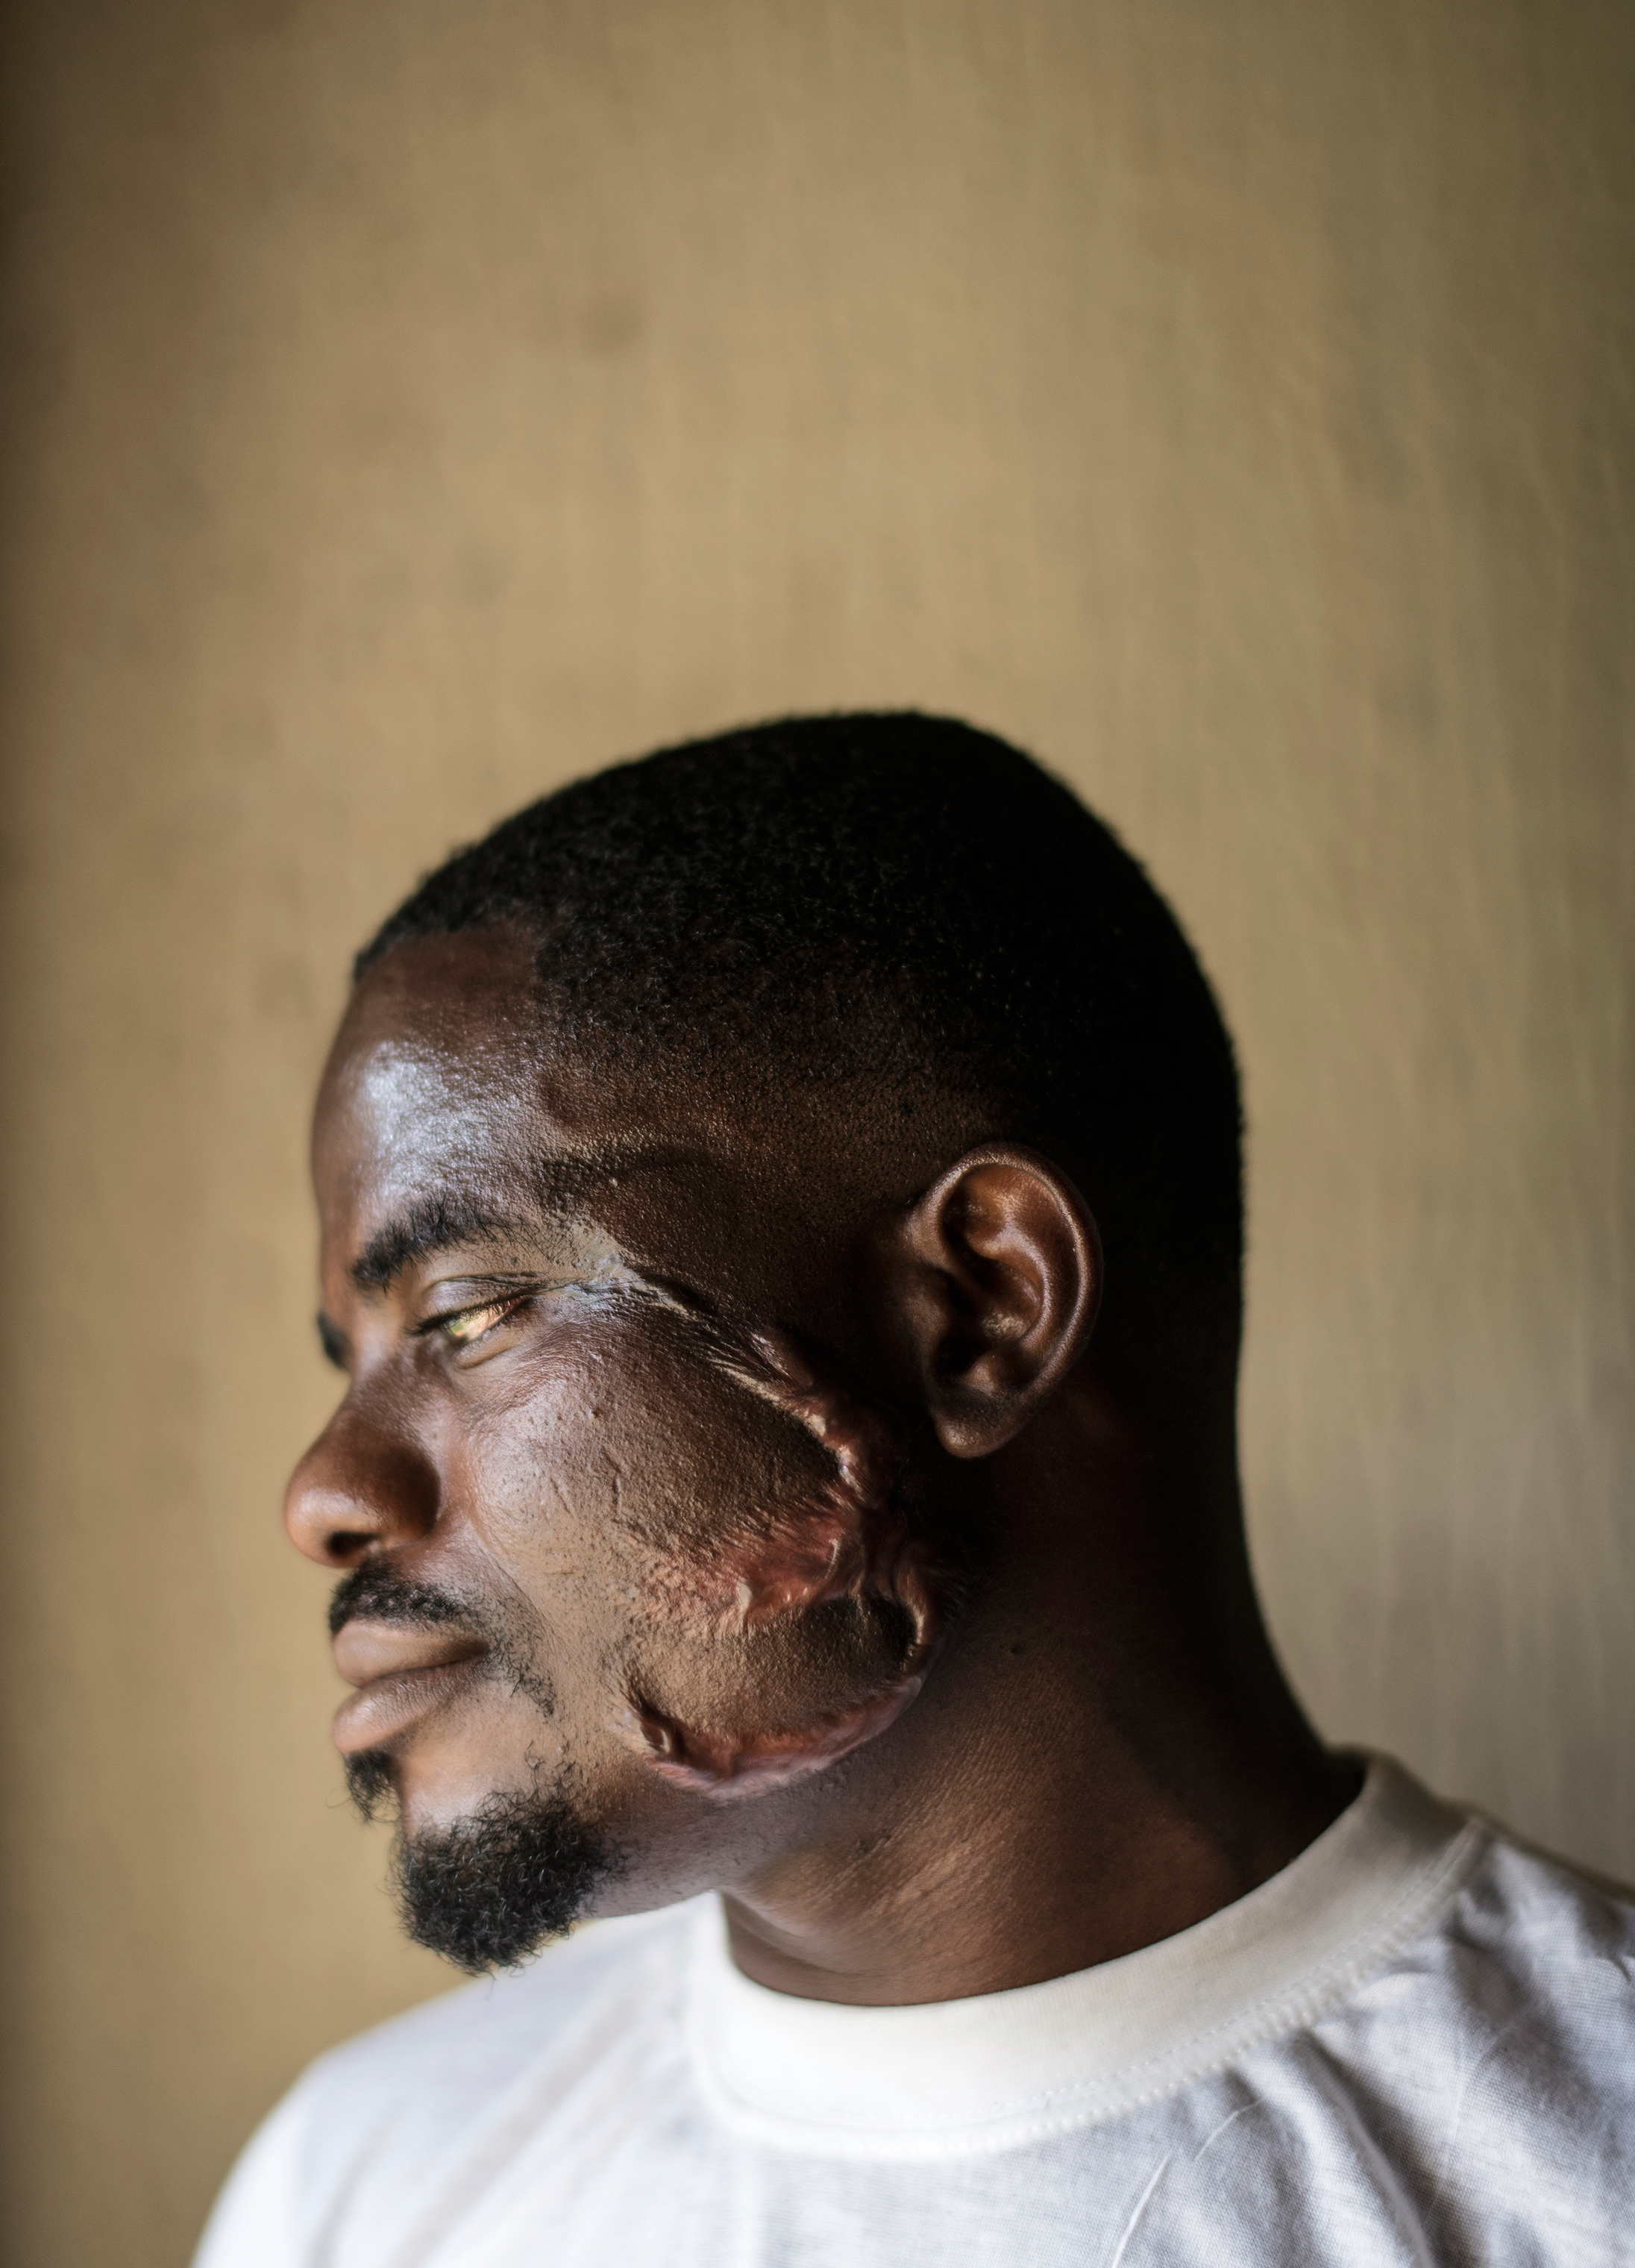 Sunday Iabarot, 32, shows the scars on his face made by a Libyan trafficker who held him captive; he now lives in a shelter in Benin City, Nigeria (Lynsey Addario for TIME)